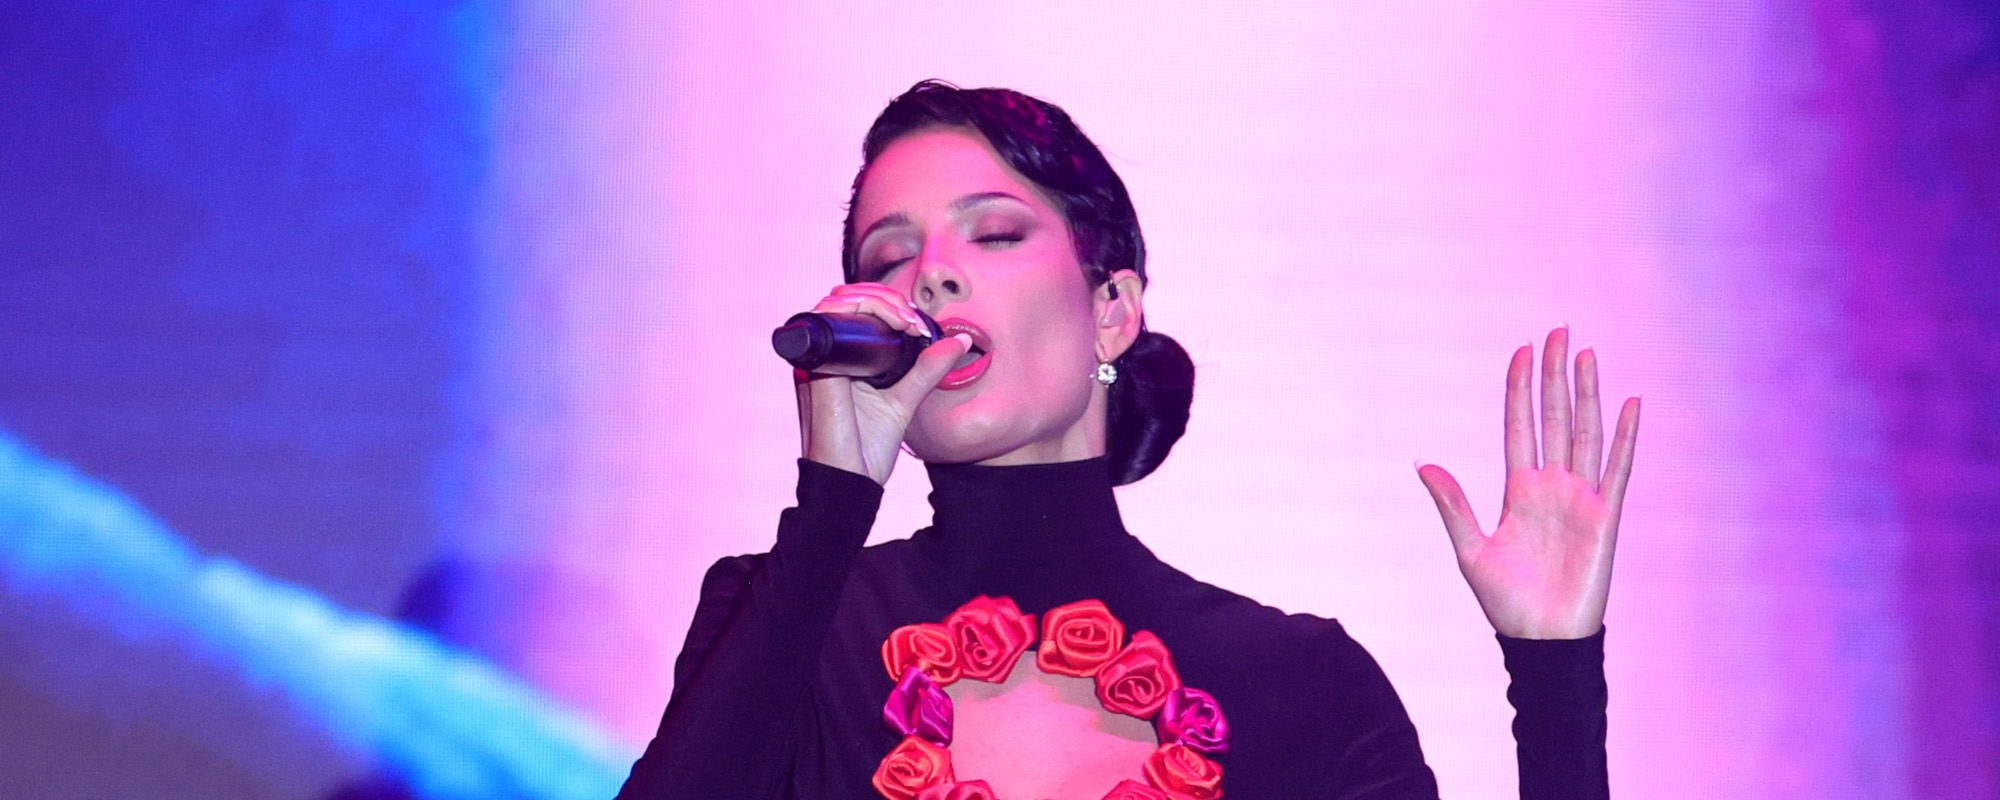 Halsey Reveals Trailer for “Lilith” Music Video From Diablo IV Soundtrack